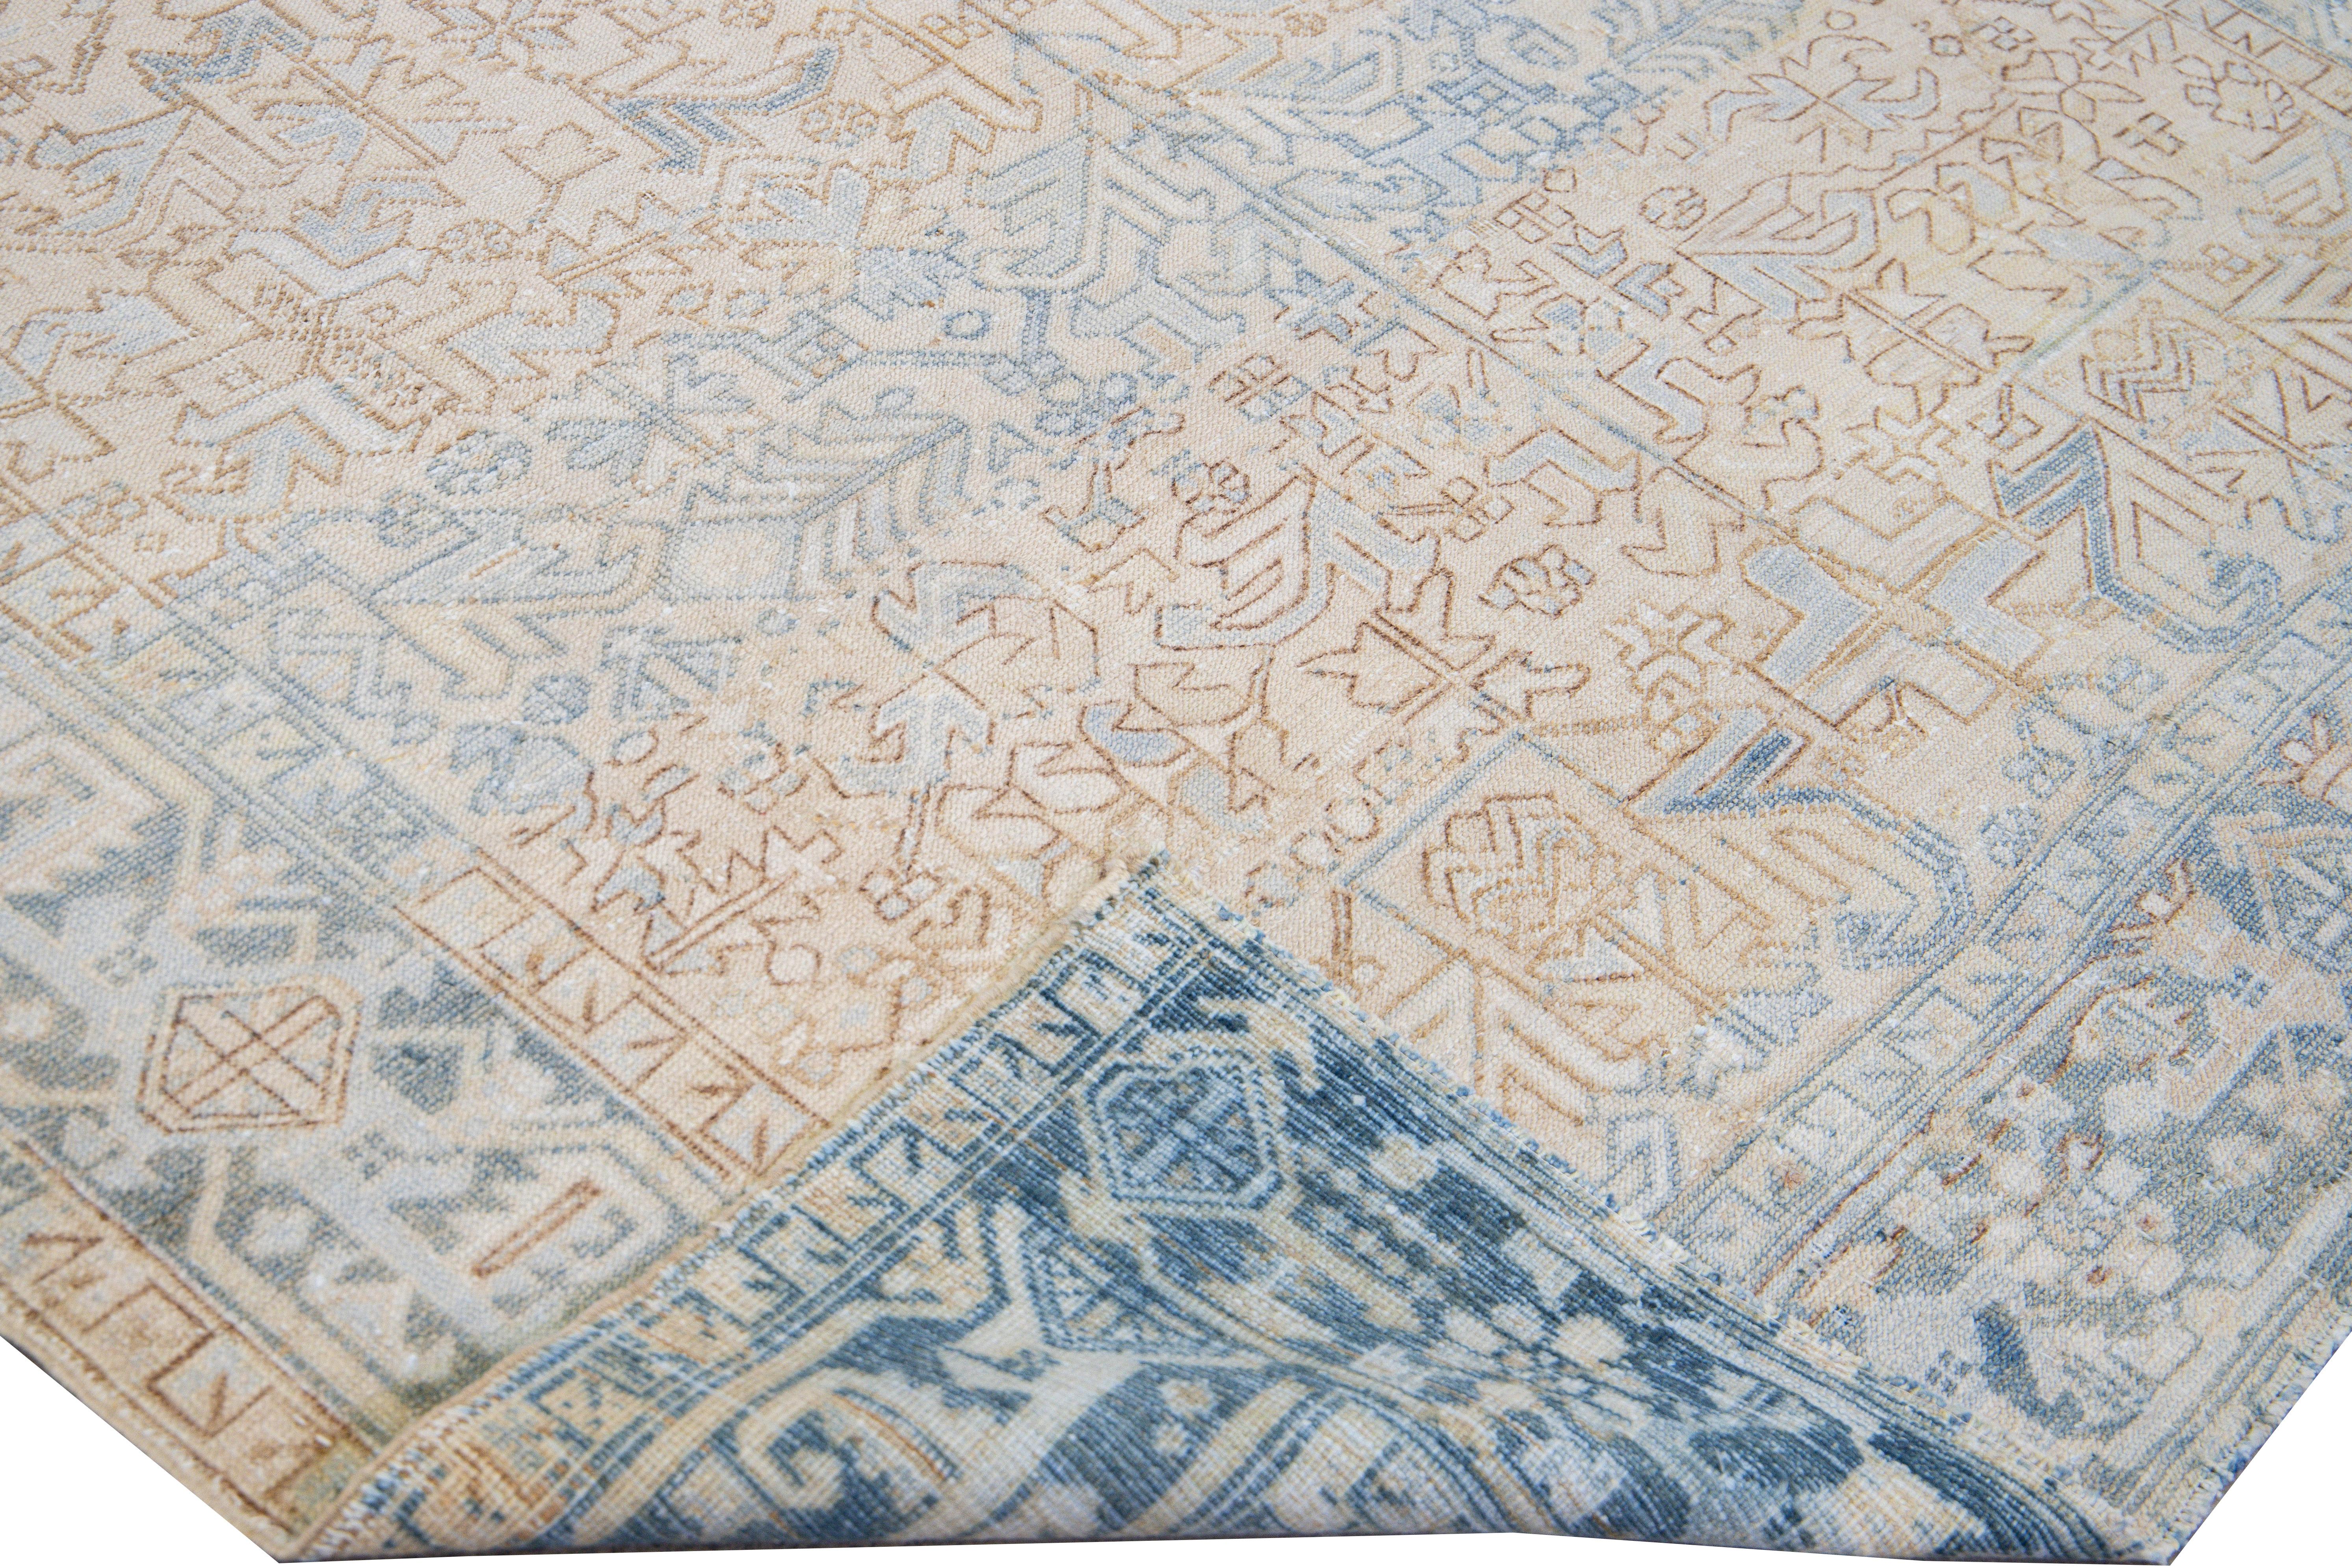 Beautiful antique Heriz hand-knotted wool rug with a beige field. This Persian rug has a blue frame and accents in an all-over gorgeous traditional geometric medallion motif design.

This rug measures: 7'8